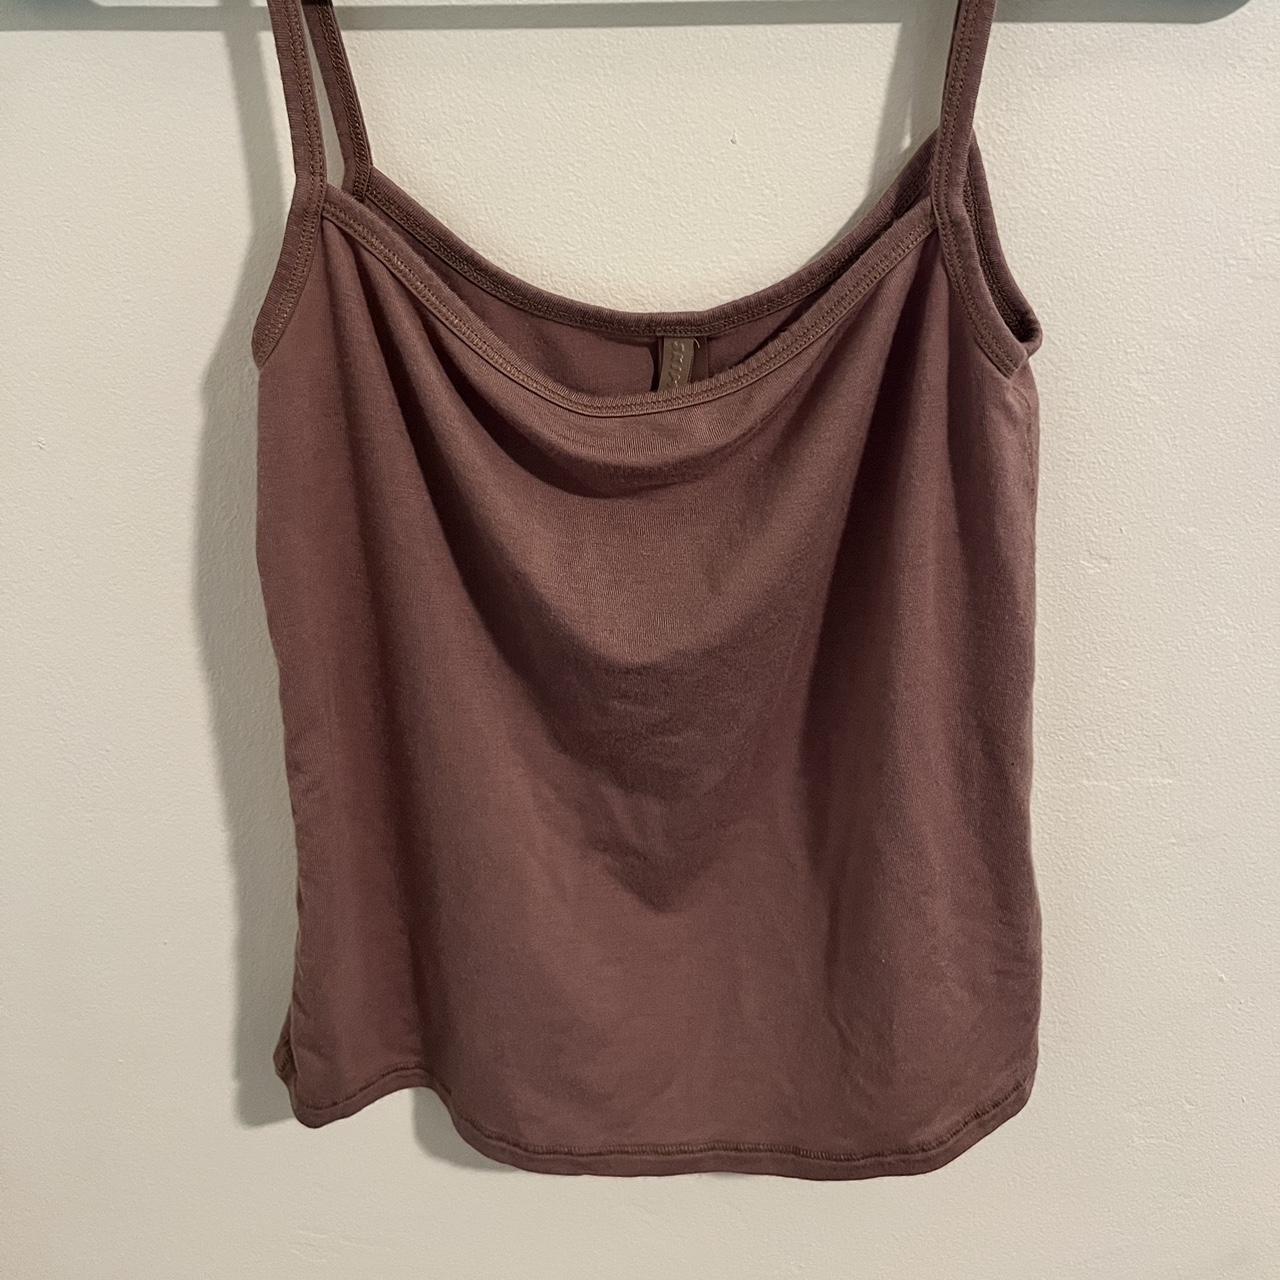 SKIMS Sleep Tank - sold out online, NWOT, Size